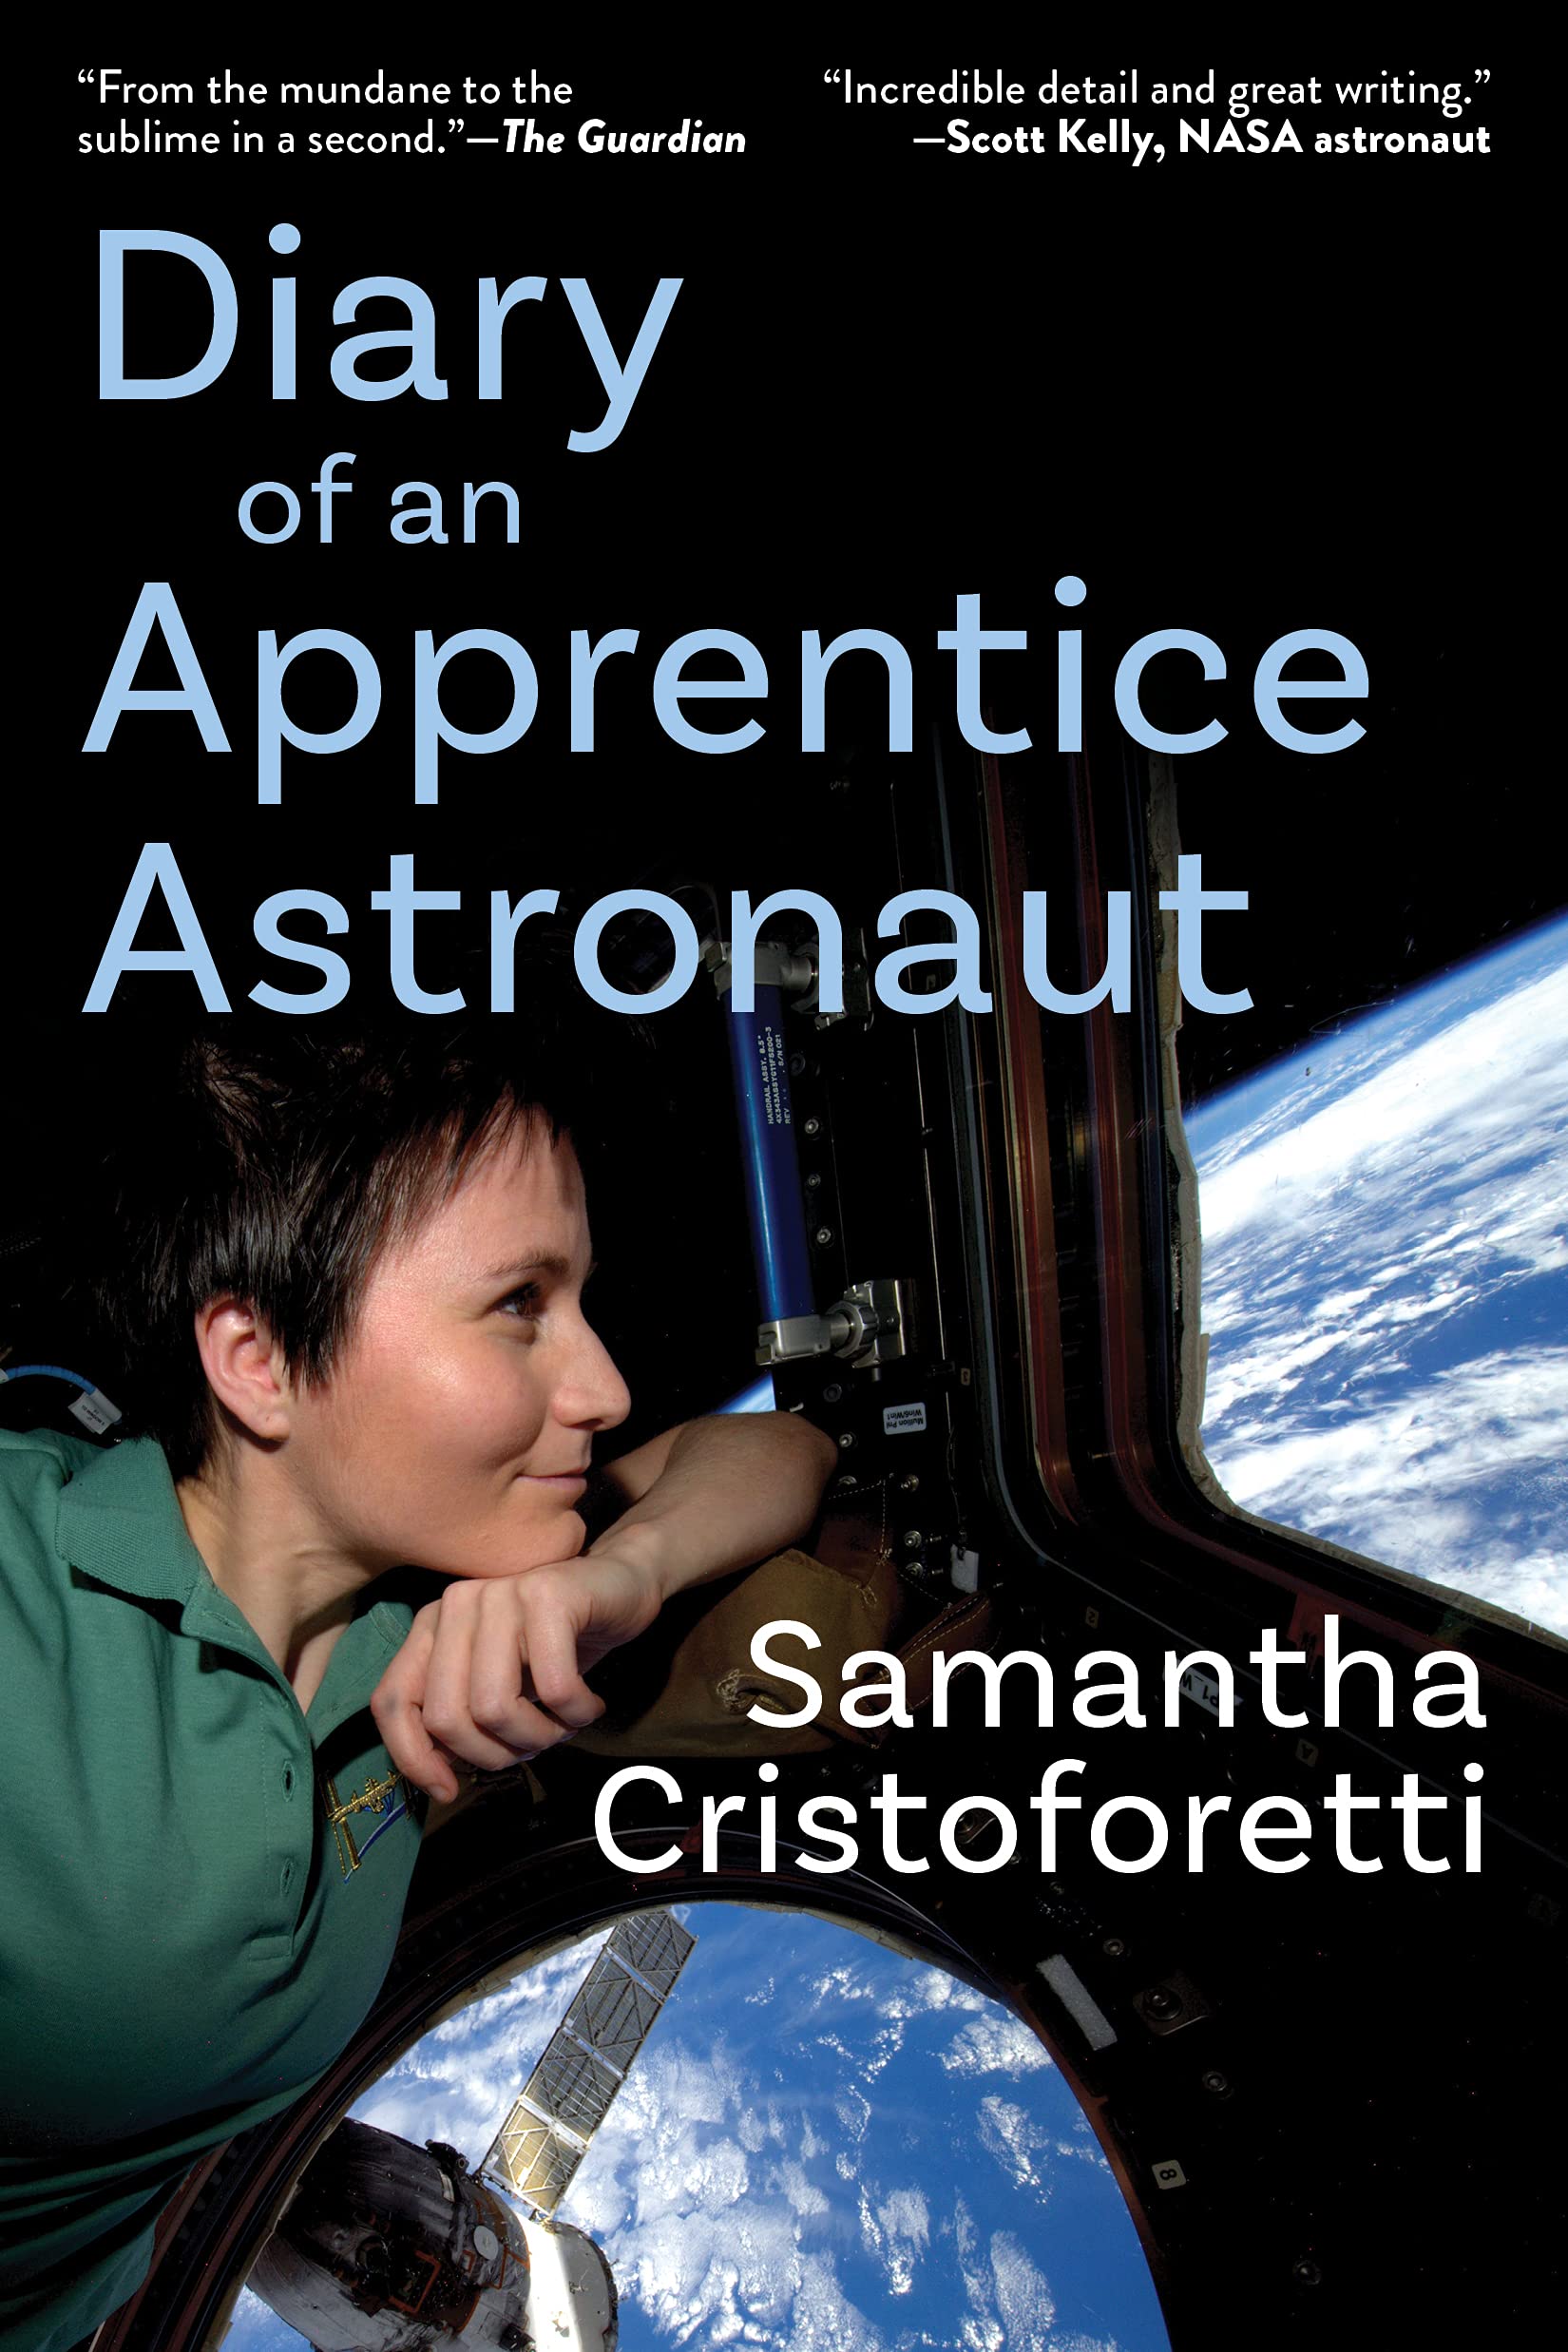 Book Review – Diary of an Apprentice Astronaut, Samantha Cristoforetti, 2020